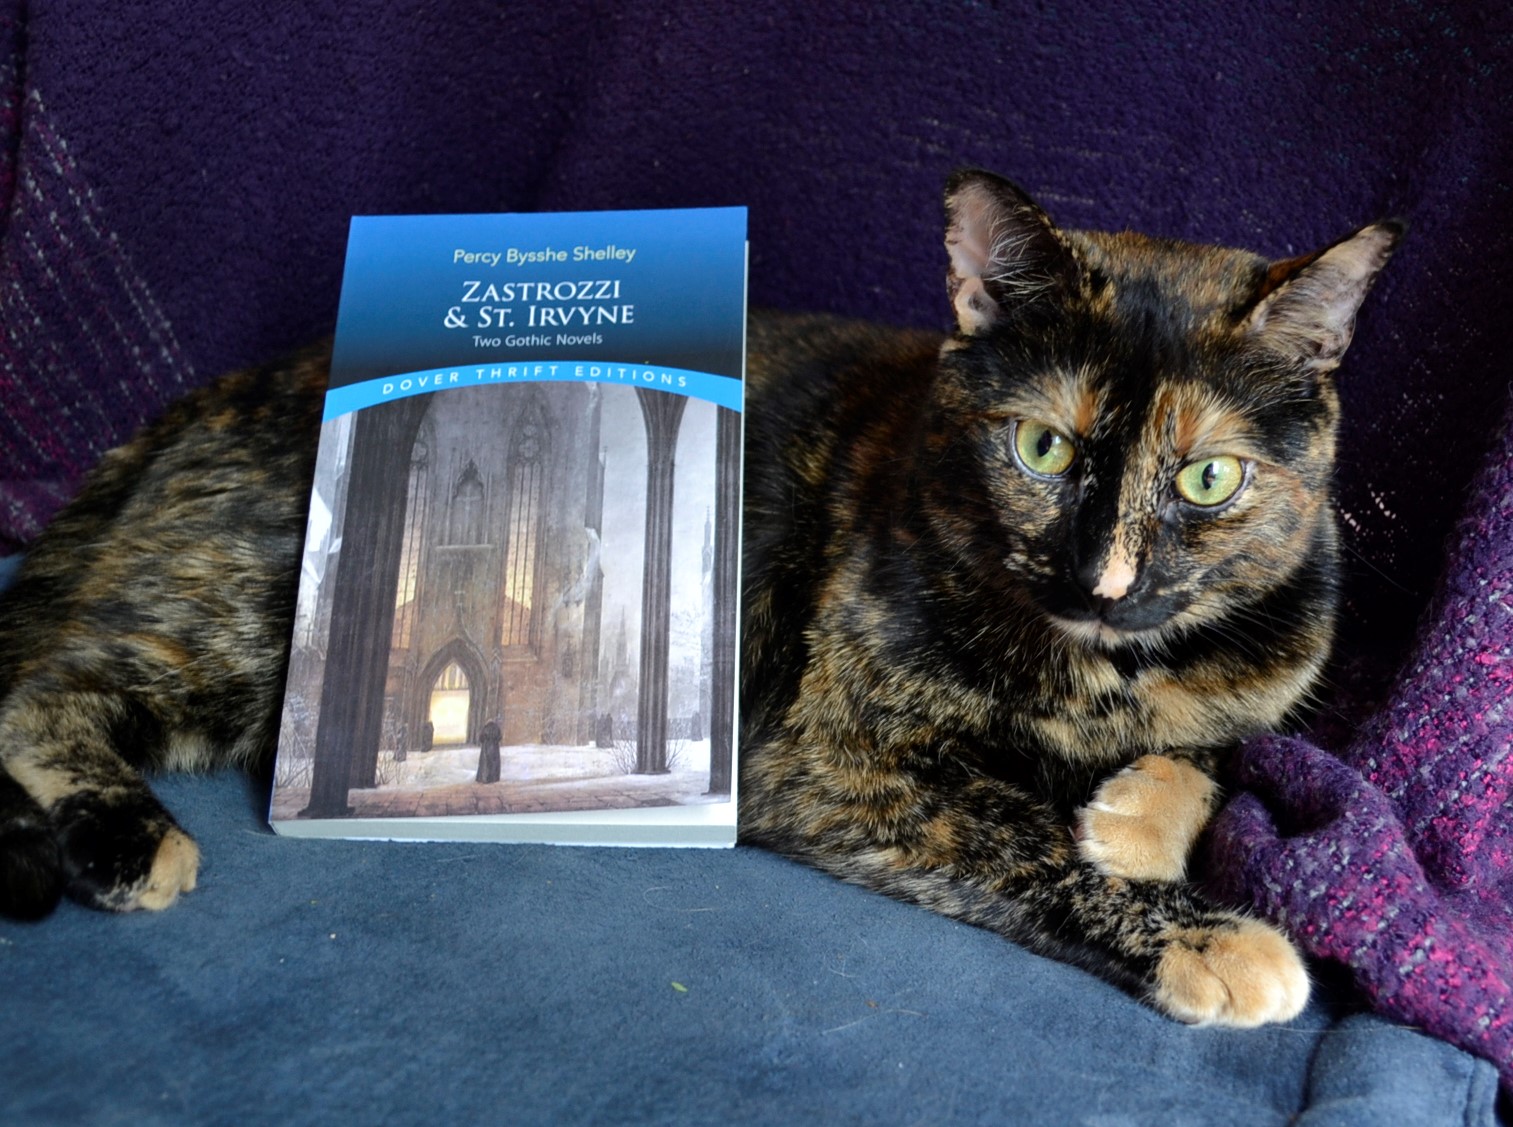 A book titled Zastrozzi & St Irvyne rests on top of a tortoiseshell cat.